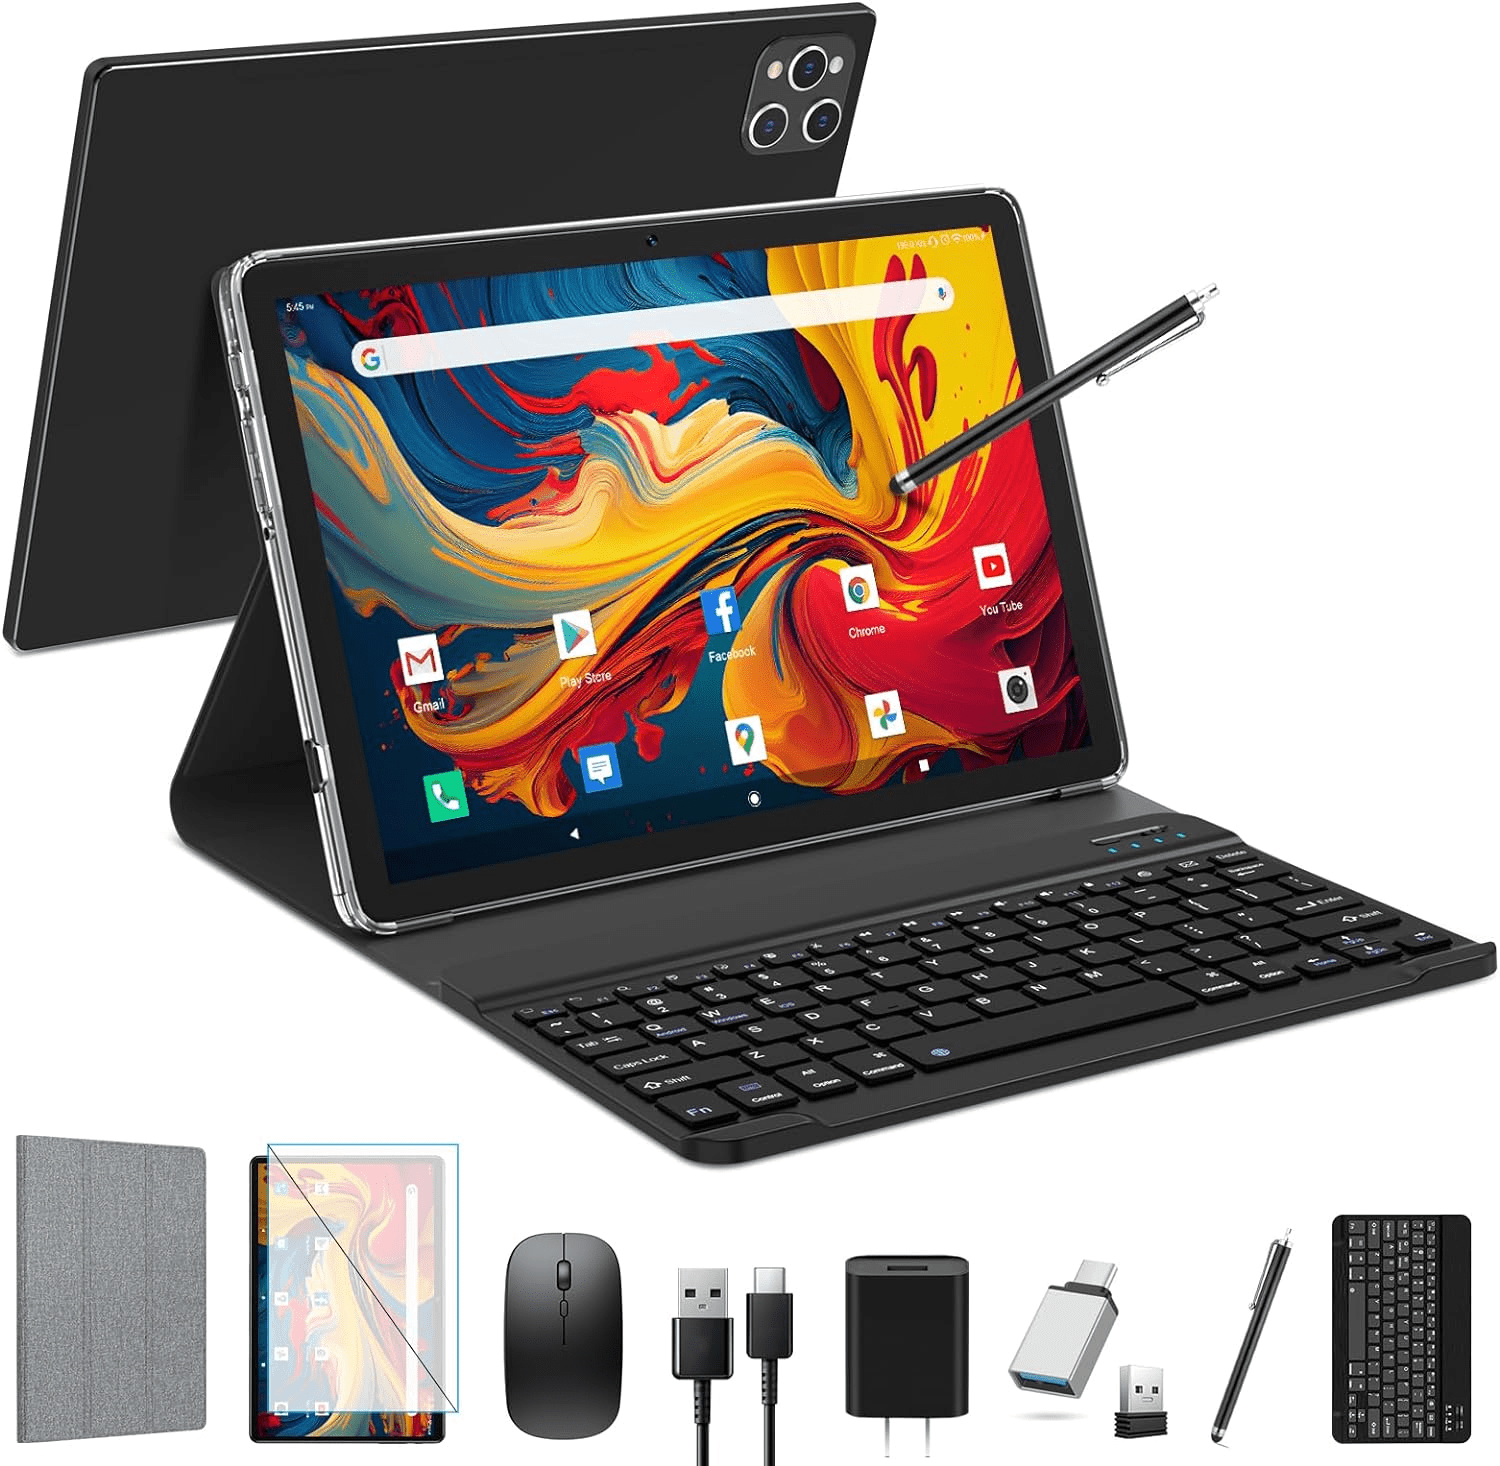 2023 Tablet 10 inch Android 13 Tablets with Octa-Core, 14GB RAM 128GB ROM,  8000mAh Battery, Drop-Proof Case, TF 512GB, HD IPS Touchscreen, 5G/2.4G